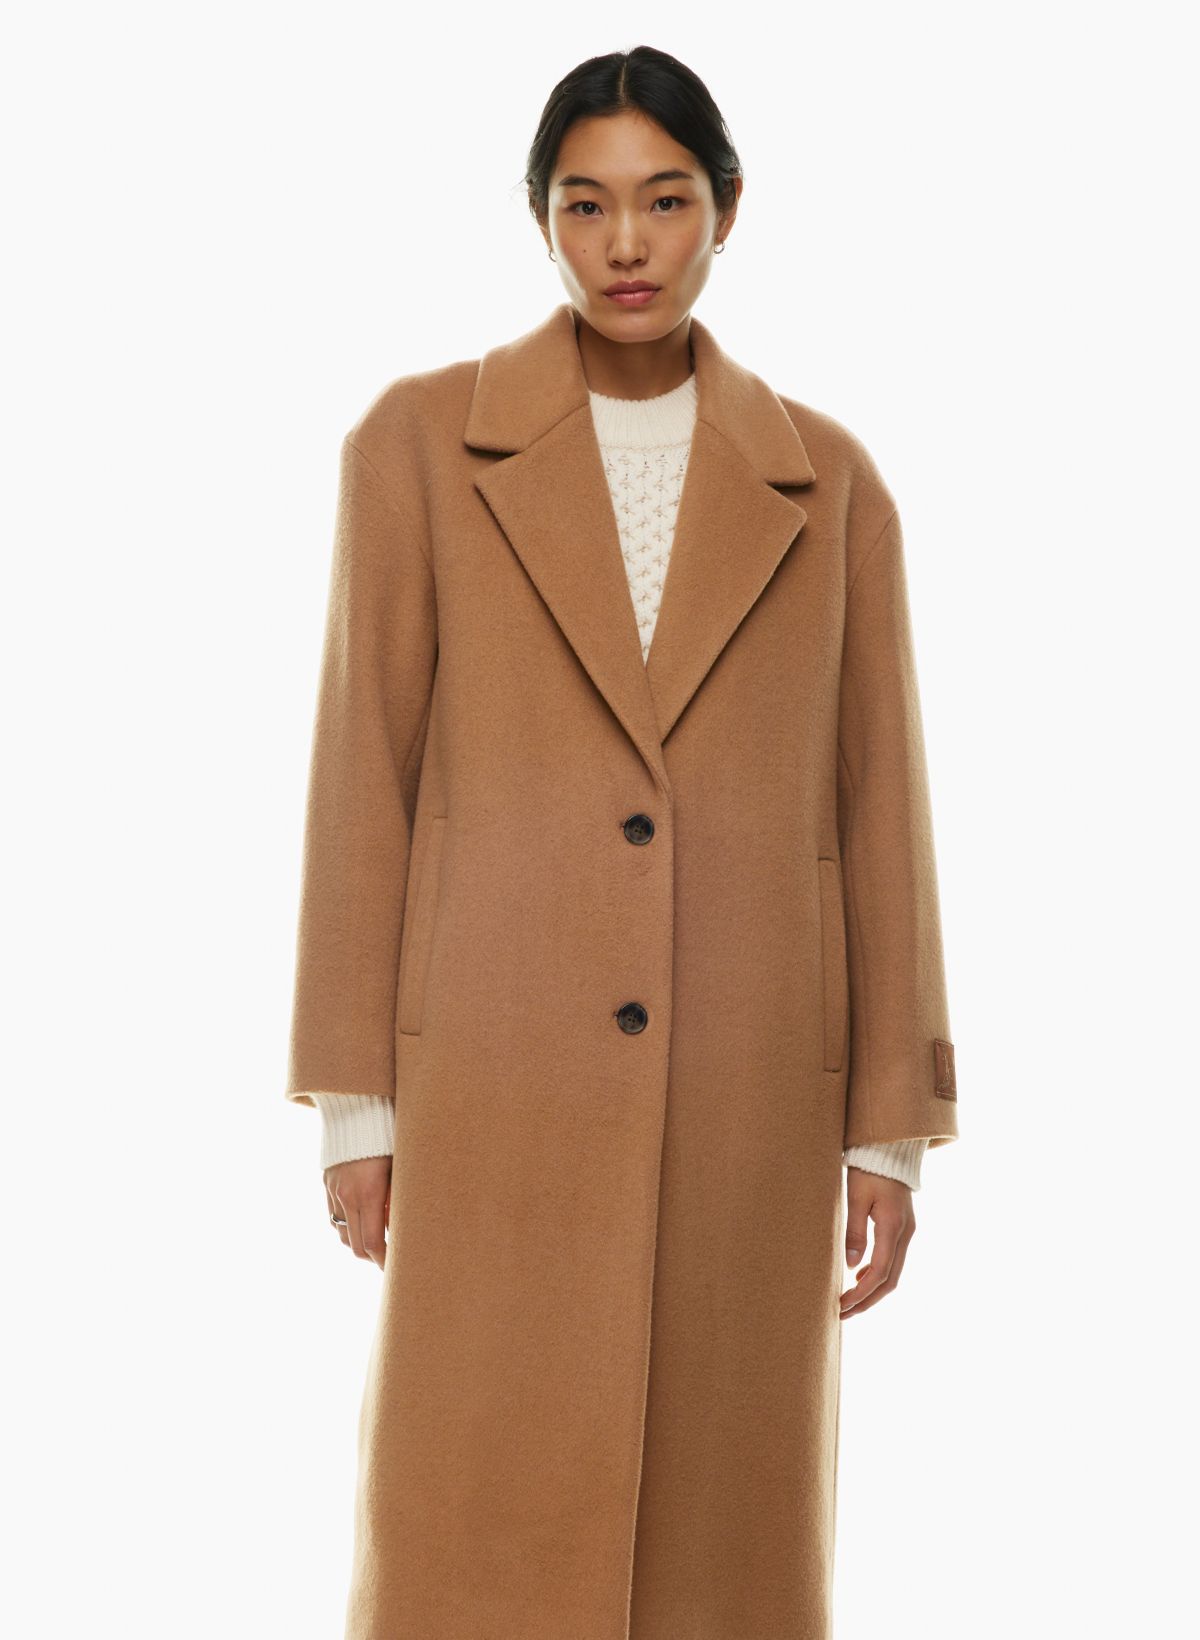 Wilfred THE ONLY | COAT US Aritzia